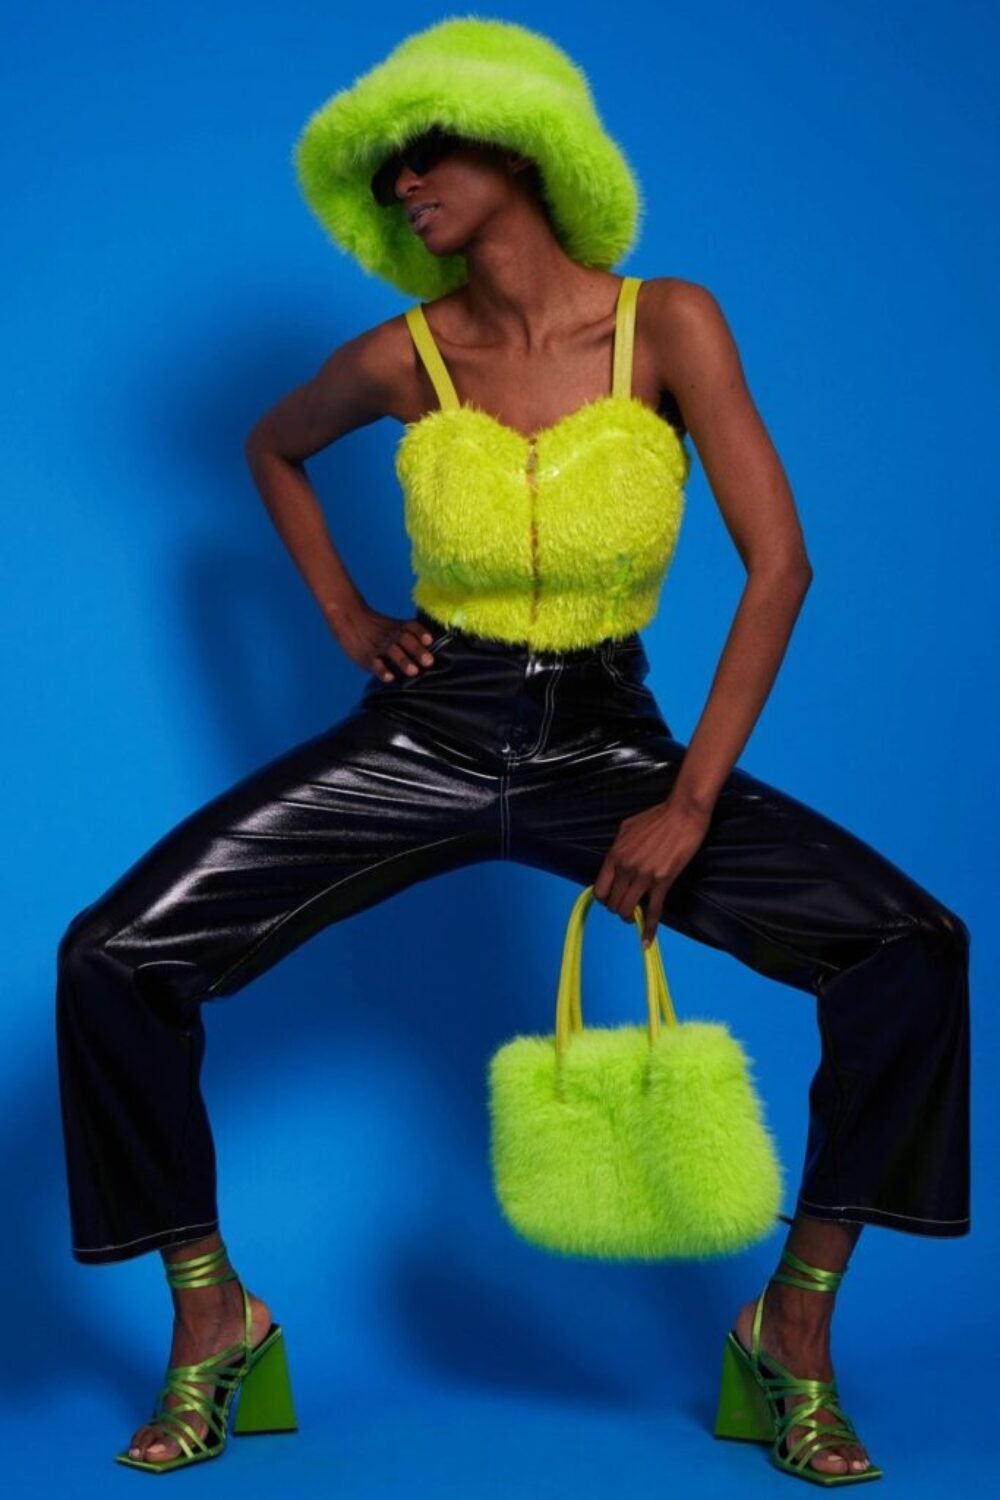 Shop Lux Lime Green Faux Fur Zip Crop Top and women's luxury and designer clothes at www.lux-apparel.co.uk